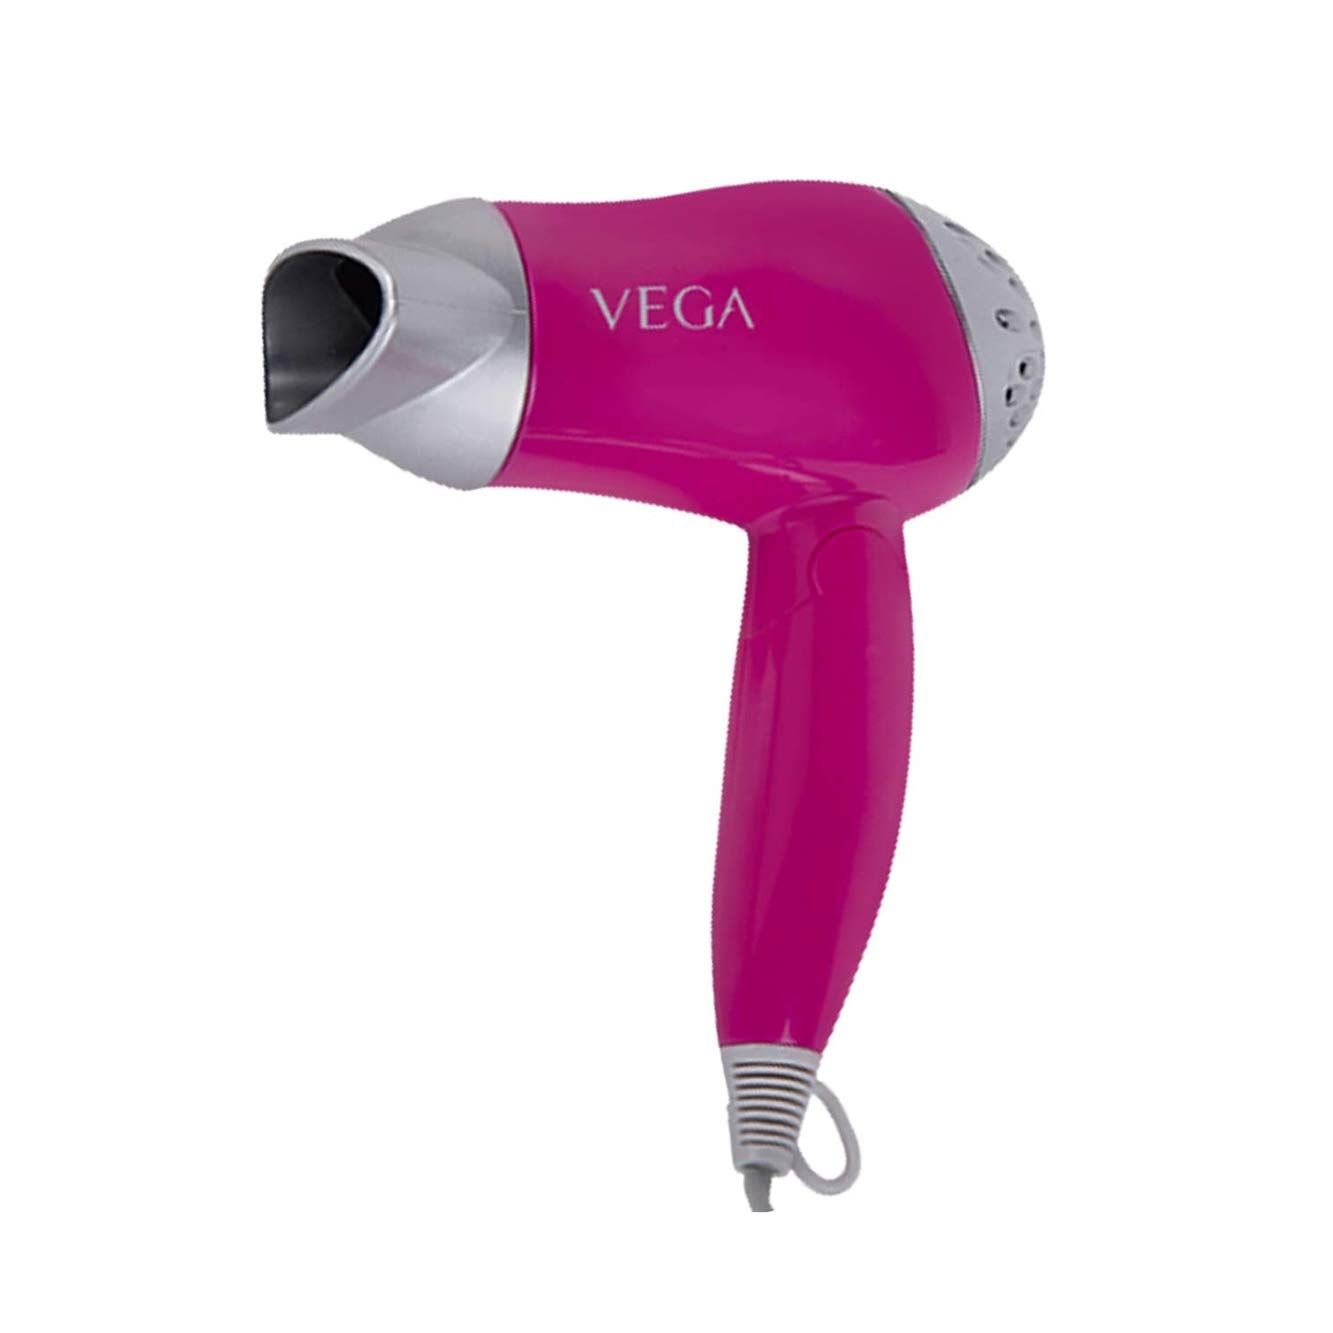 VEGA Go Handy Foldable Hair Dryer With Heat & Cool Setting And Detachable Nozzle (VHDH-04), Color May Vary